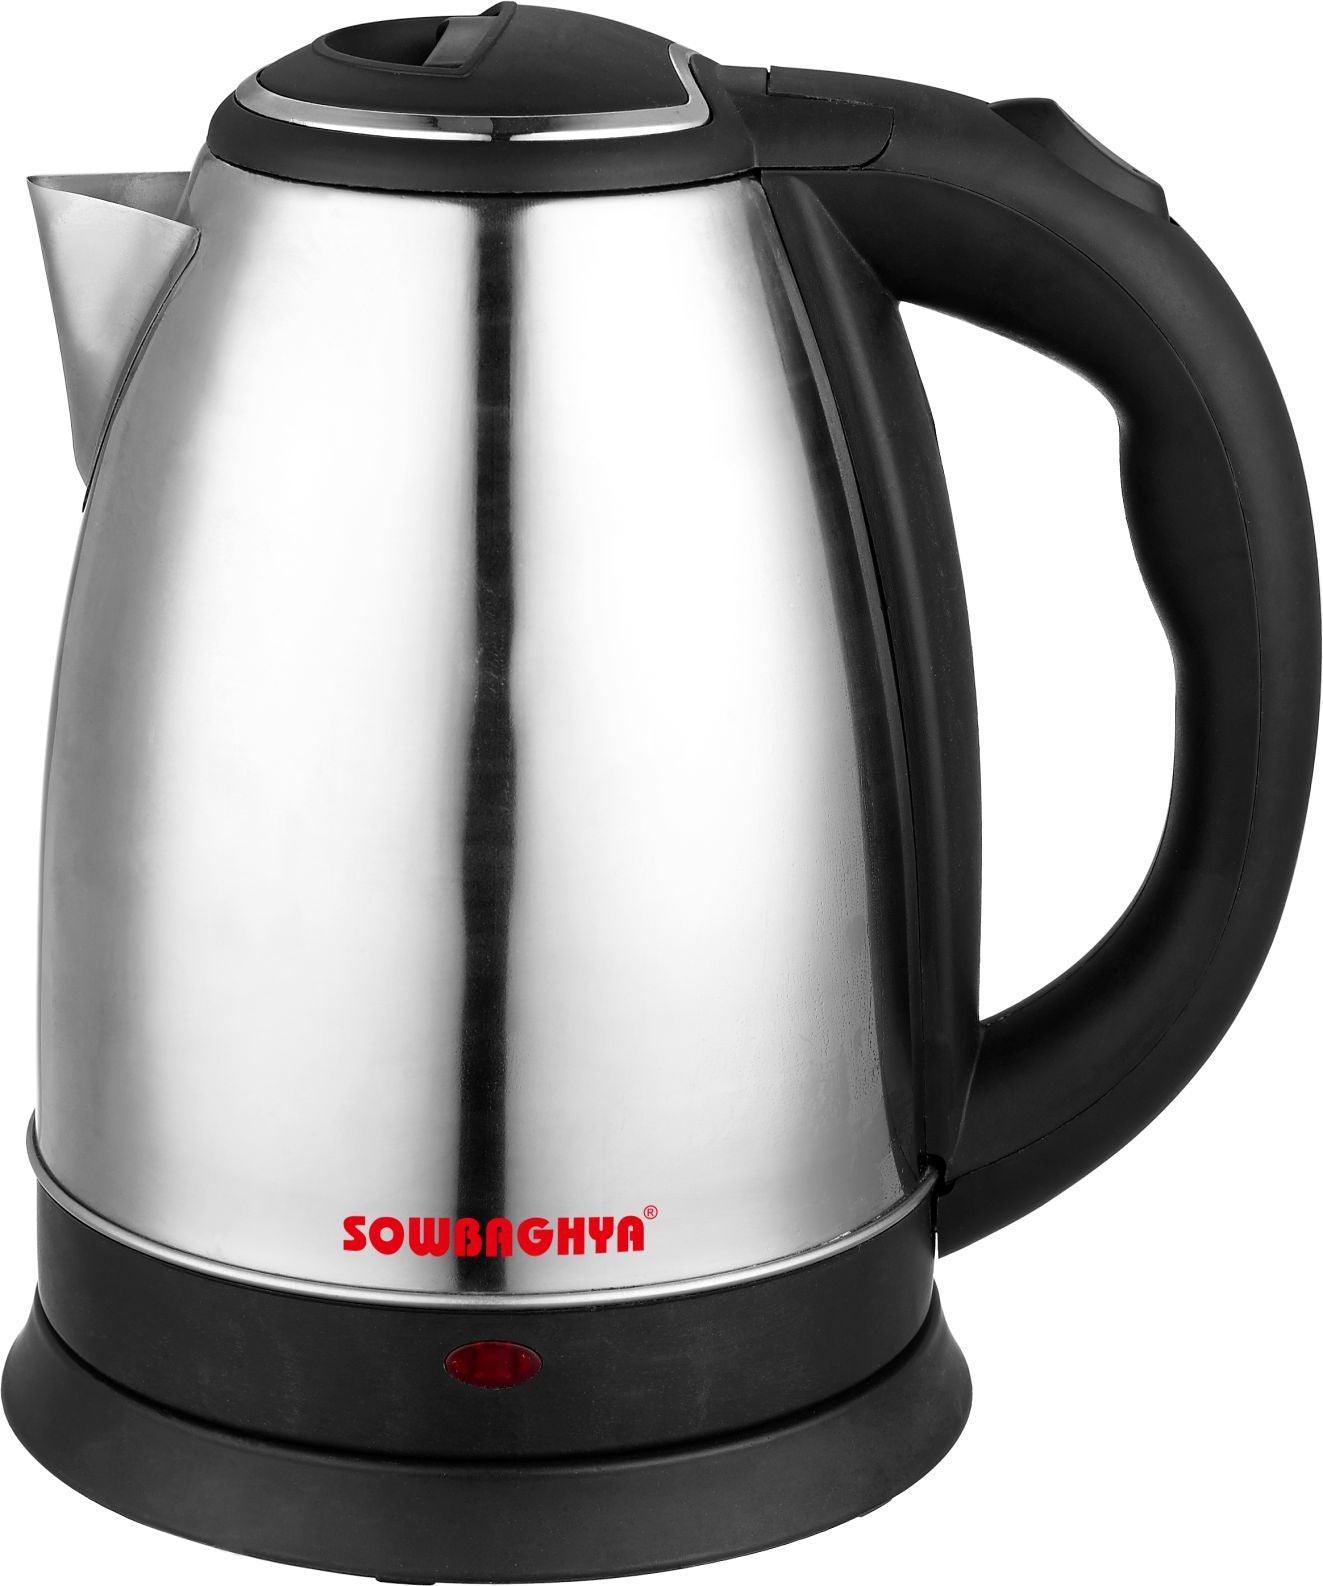 Stainless Steel 1.2Ltrs Water Kettle - SOWBAGHYA